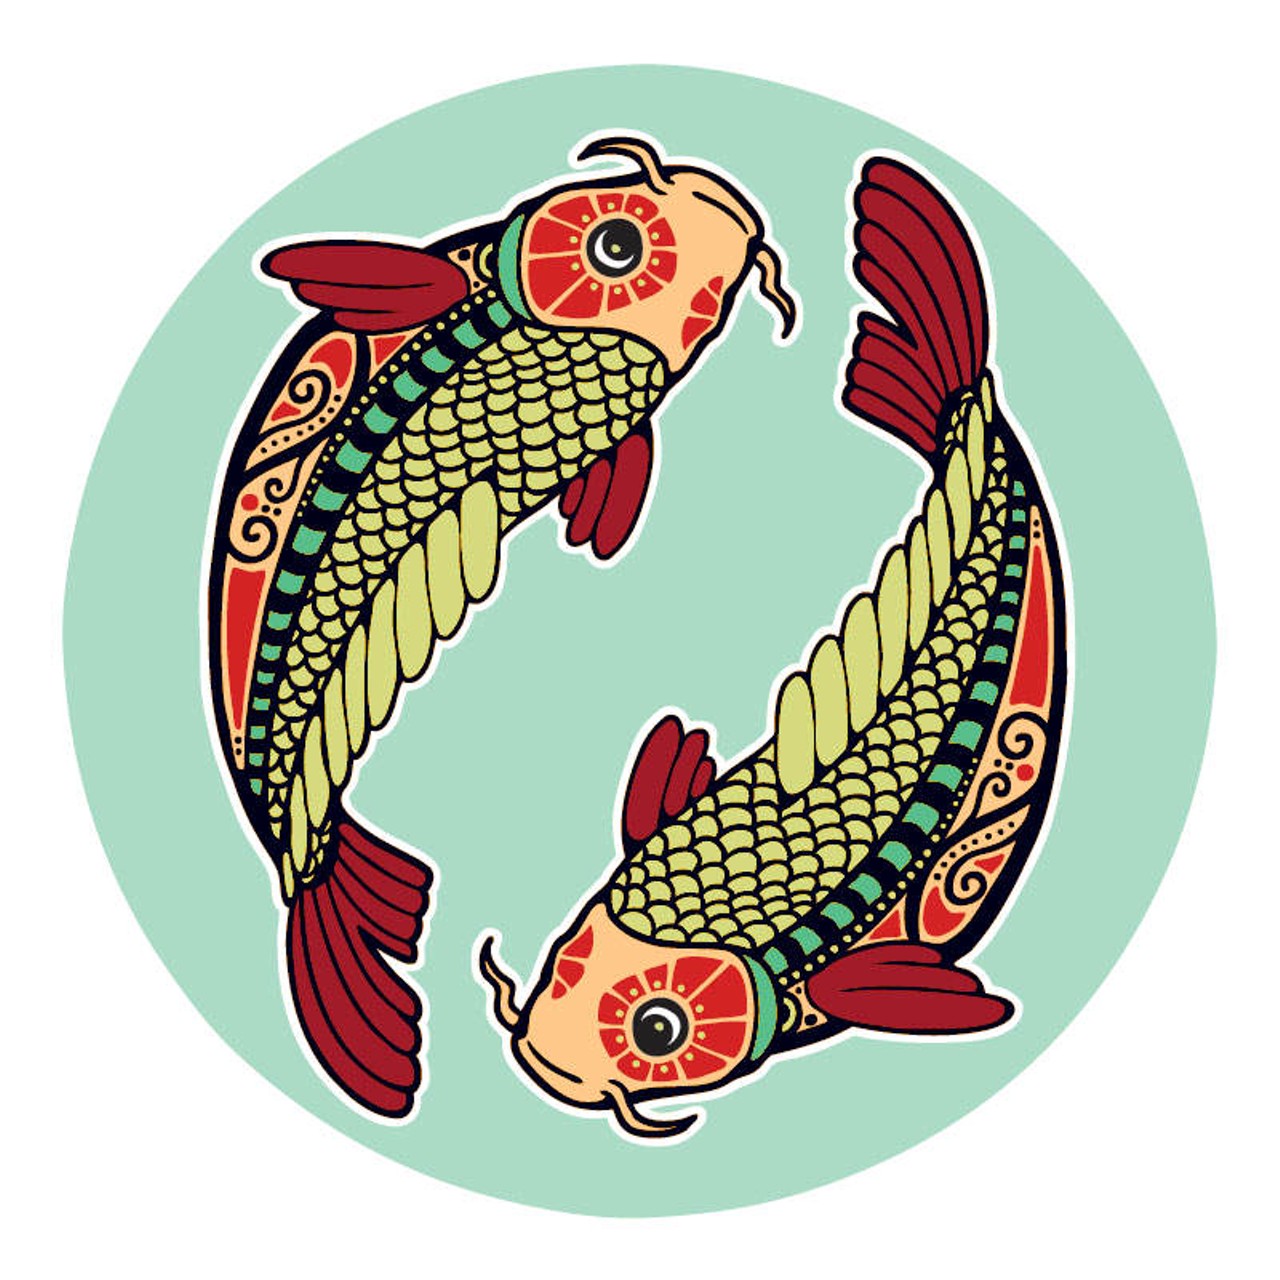 PISCES (Feb. 21-March 20): 
The web of intrigue gets more interesting by the day. You have wound up in a situation where the direct approach isn&#146;t going to work. Too many complexities make it hard to have any certainty about where others want this to go. Before you decide to hook up, consider any elements that might lead you to believe you&#146;re being exploited. In the long run all of your actions will benefit through a policy of restraint. In your human relations, there should be no rush either. It takes a wise soul to see past appearances to the truth of where others&#146; motivations really lie.